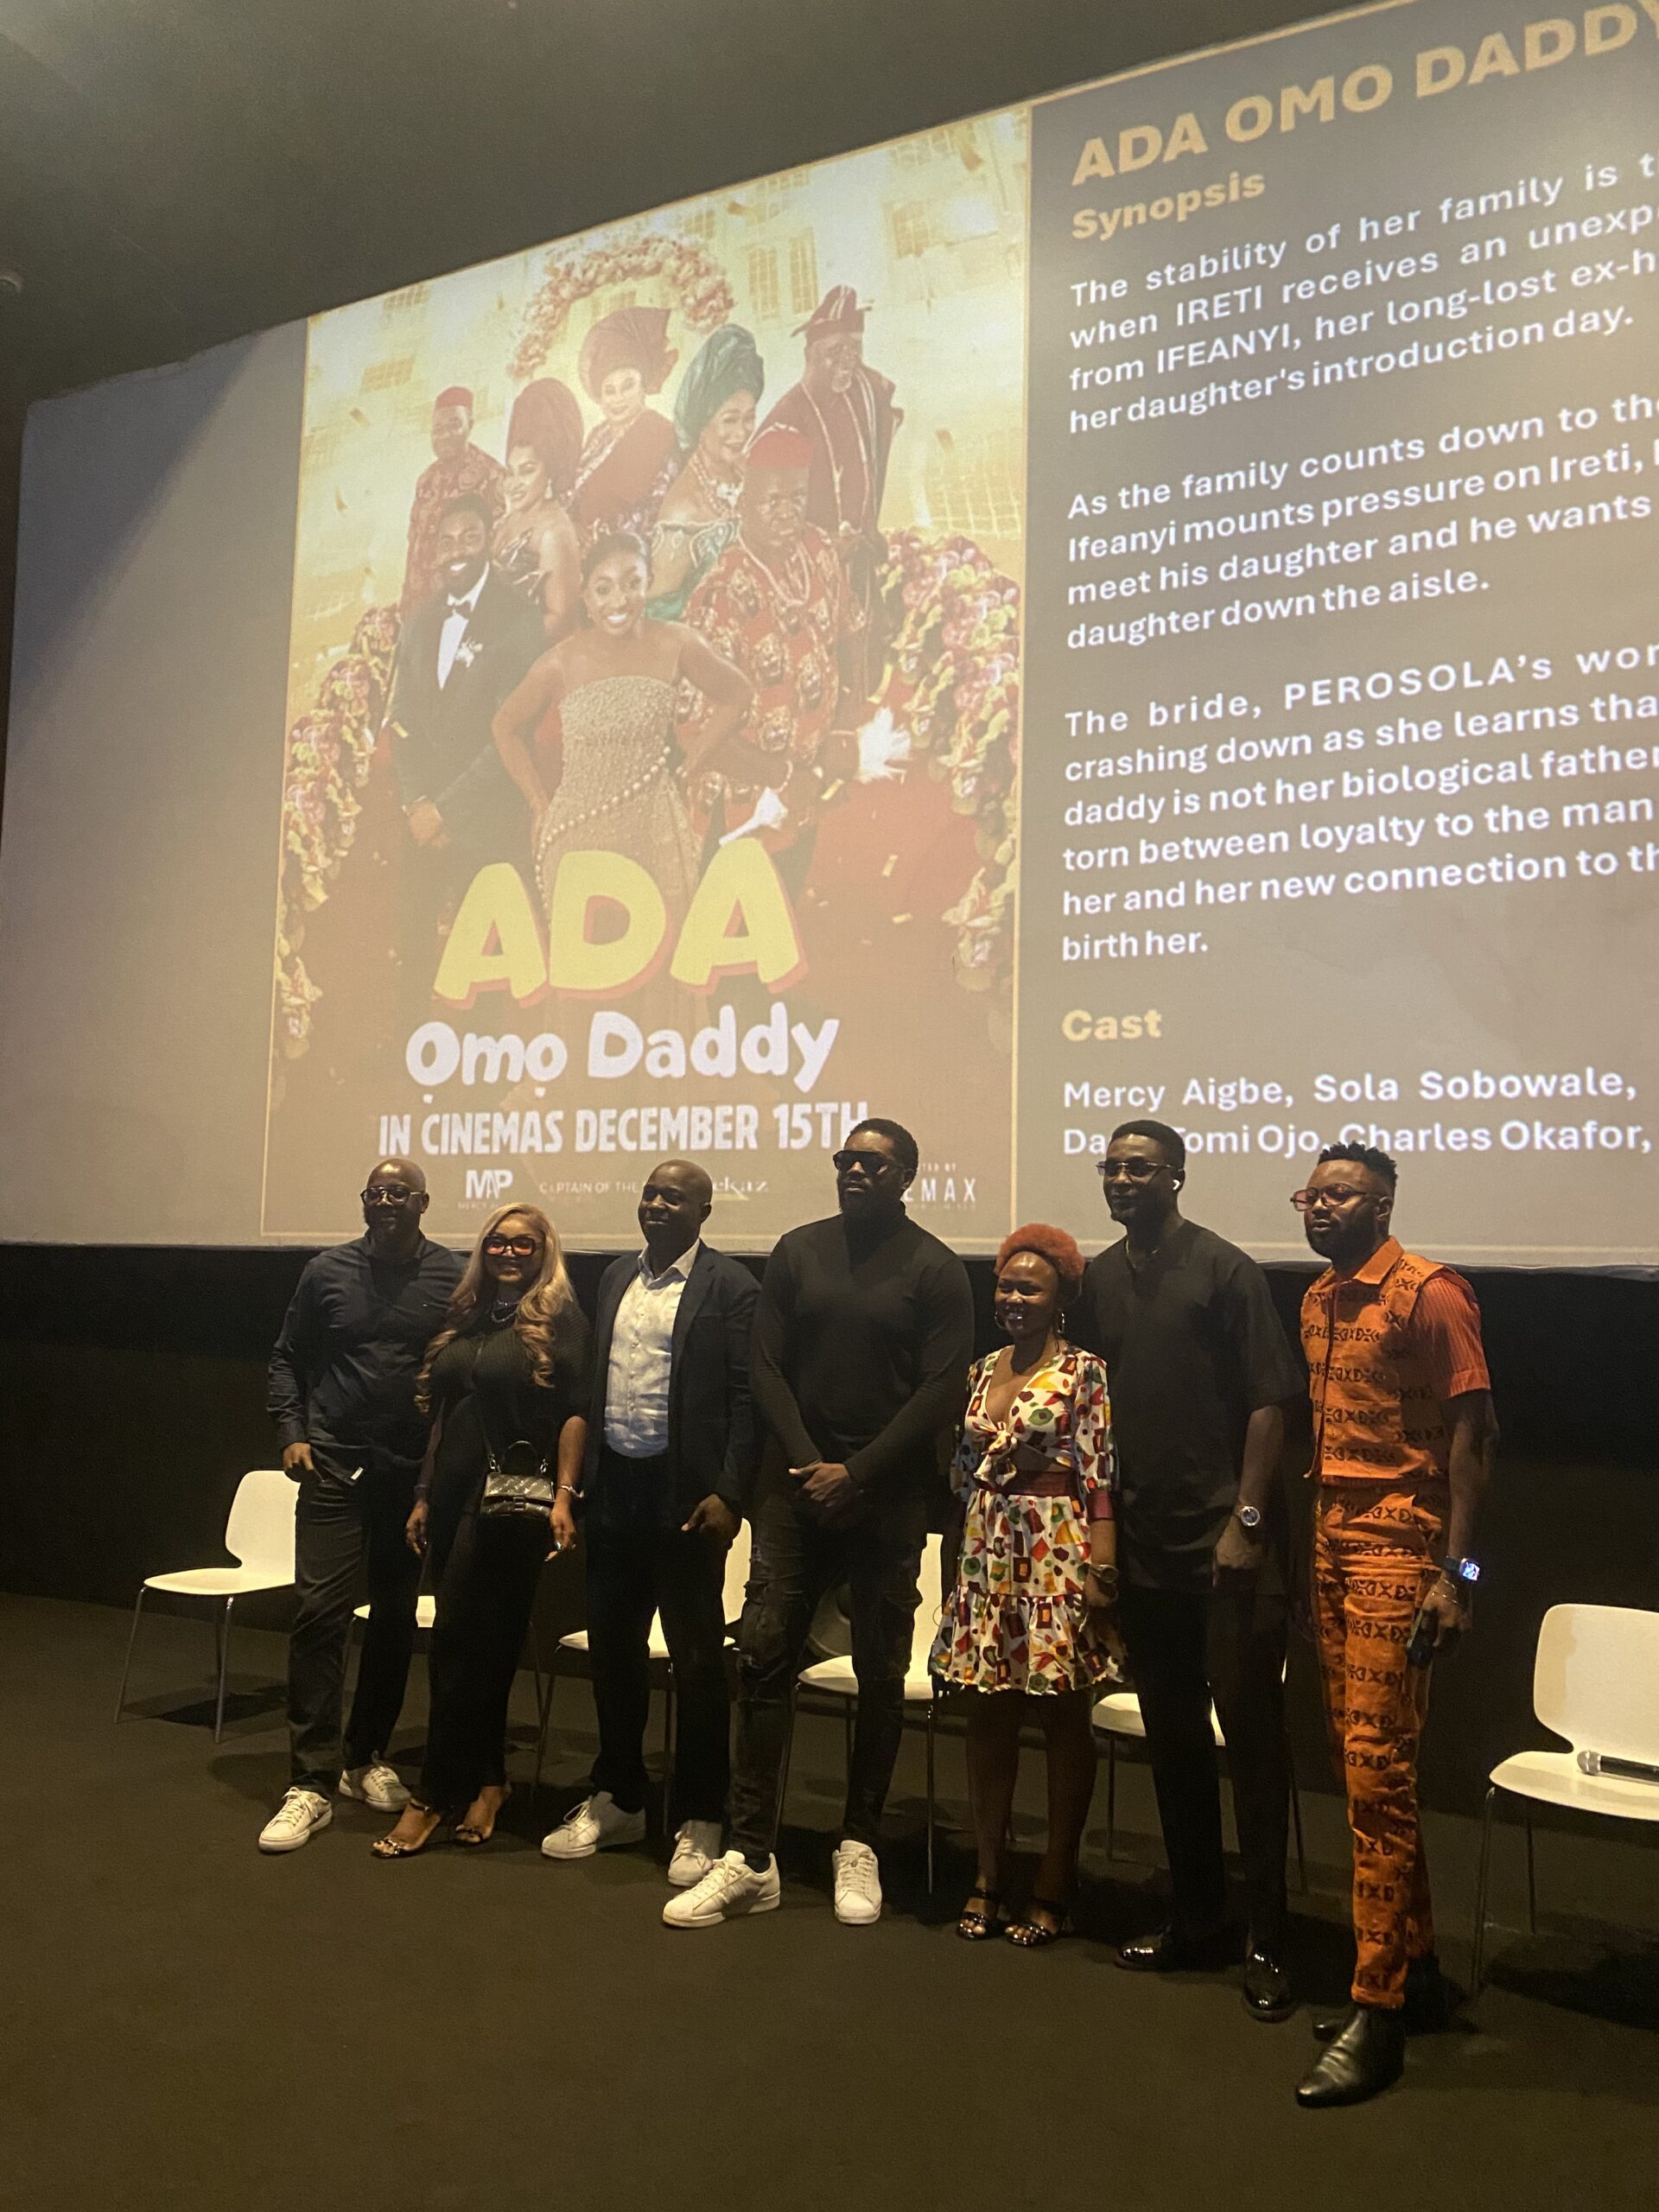 image 67205121 scaled - "Ada Omo Daddy" Engages Exhibitors in First Preview, Confirms Synopsis, Poster & Trailer Launch Ahead of December